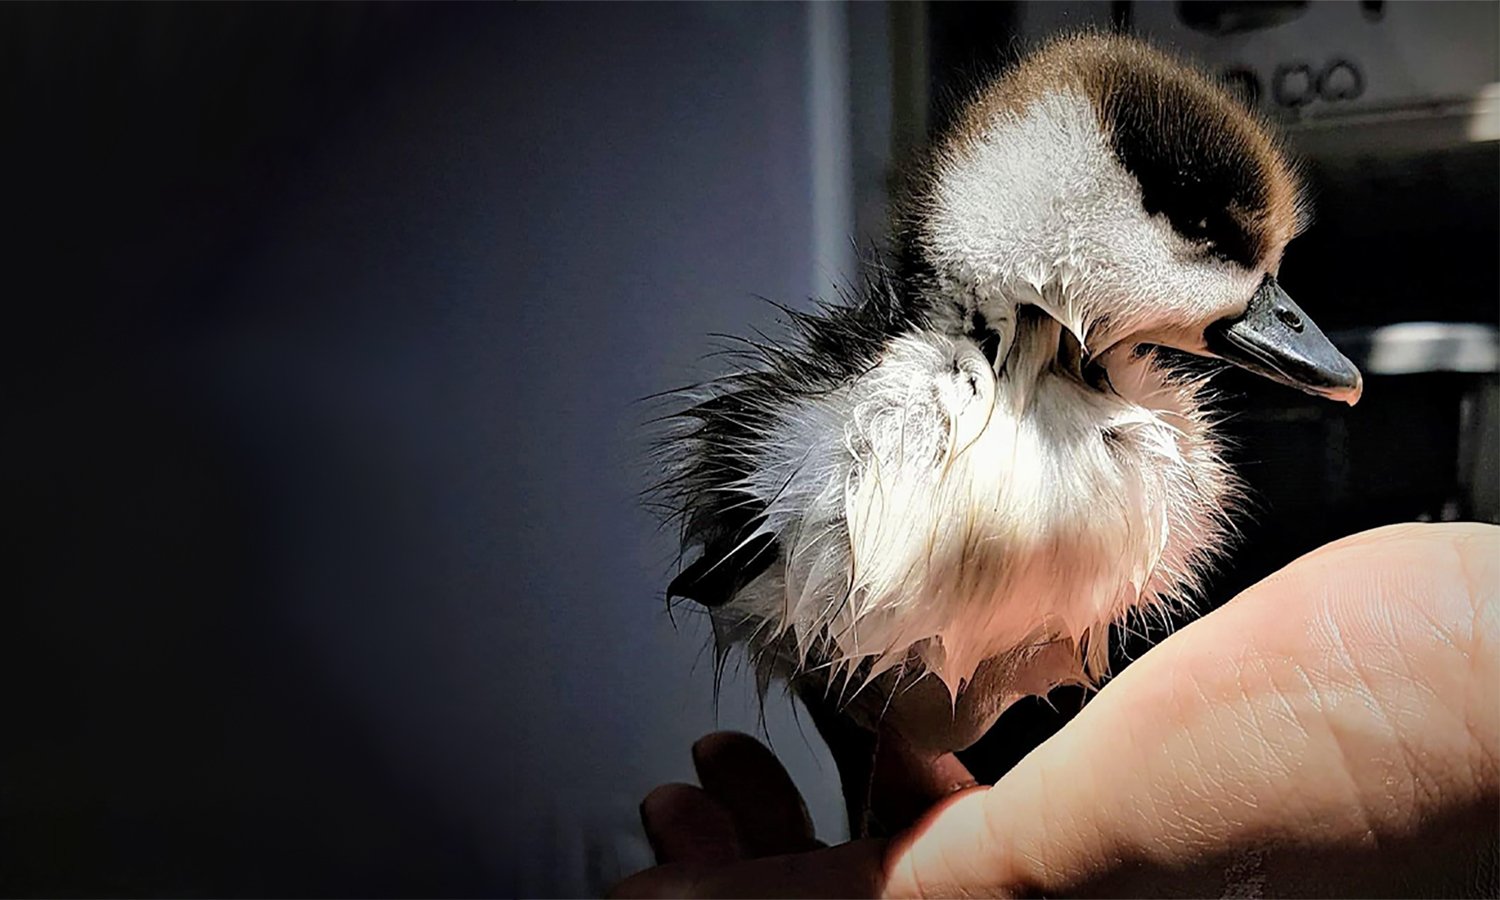 Small white and brown duckling with wet fur standing in someone's hand after a bath